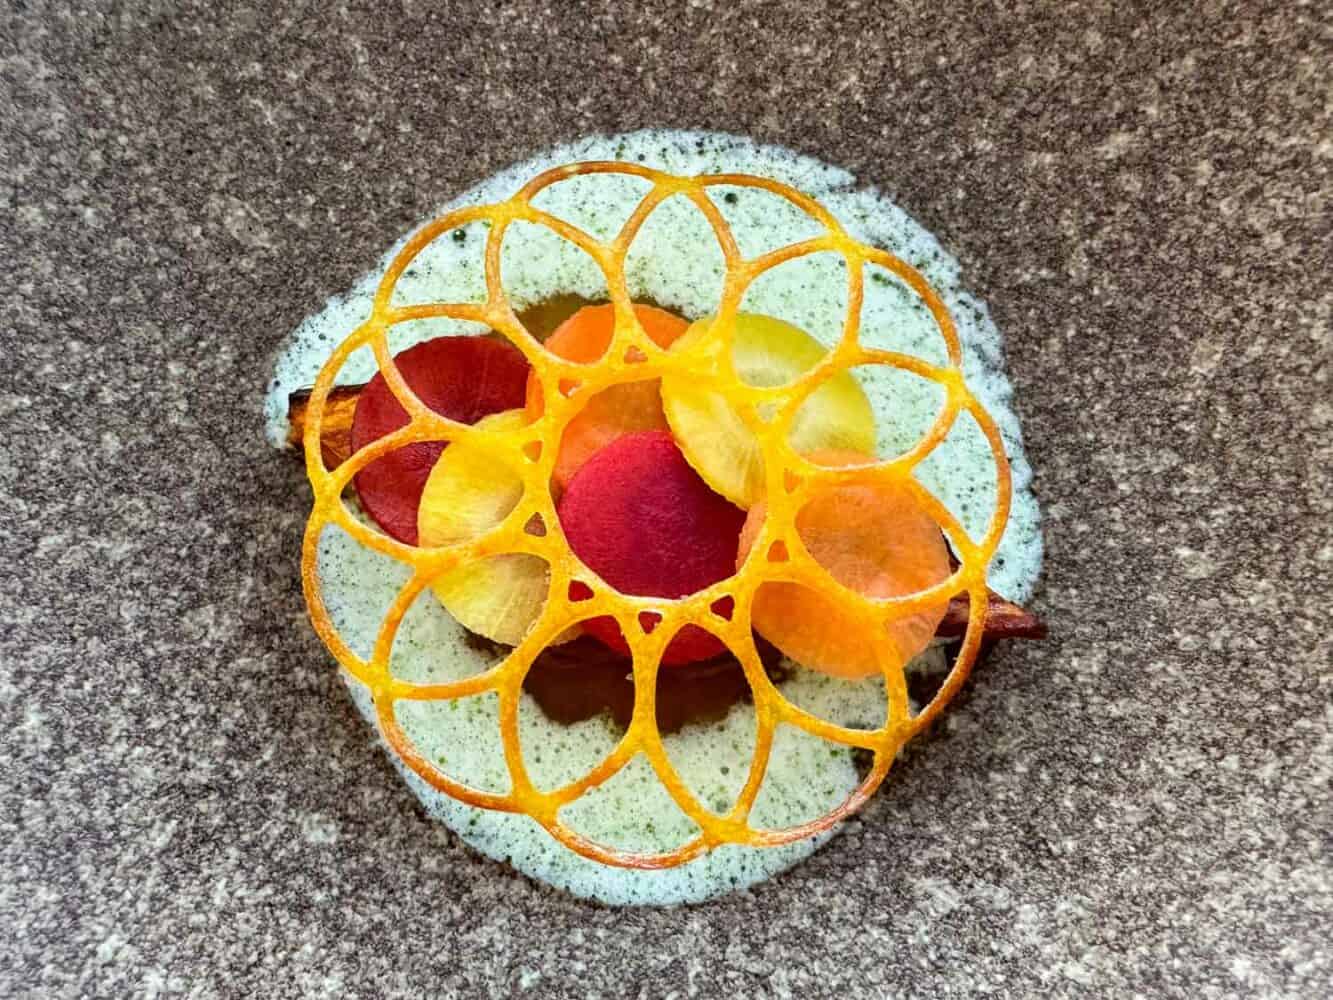 Beautiful carrot dish at Tern fine dining restaurant in Worthing, England